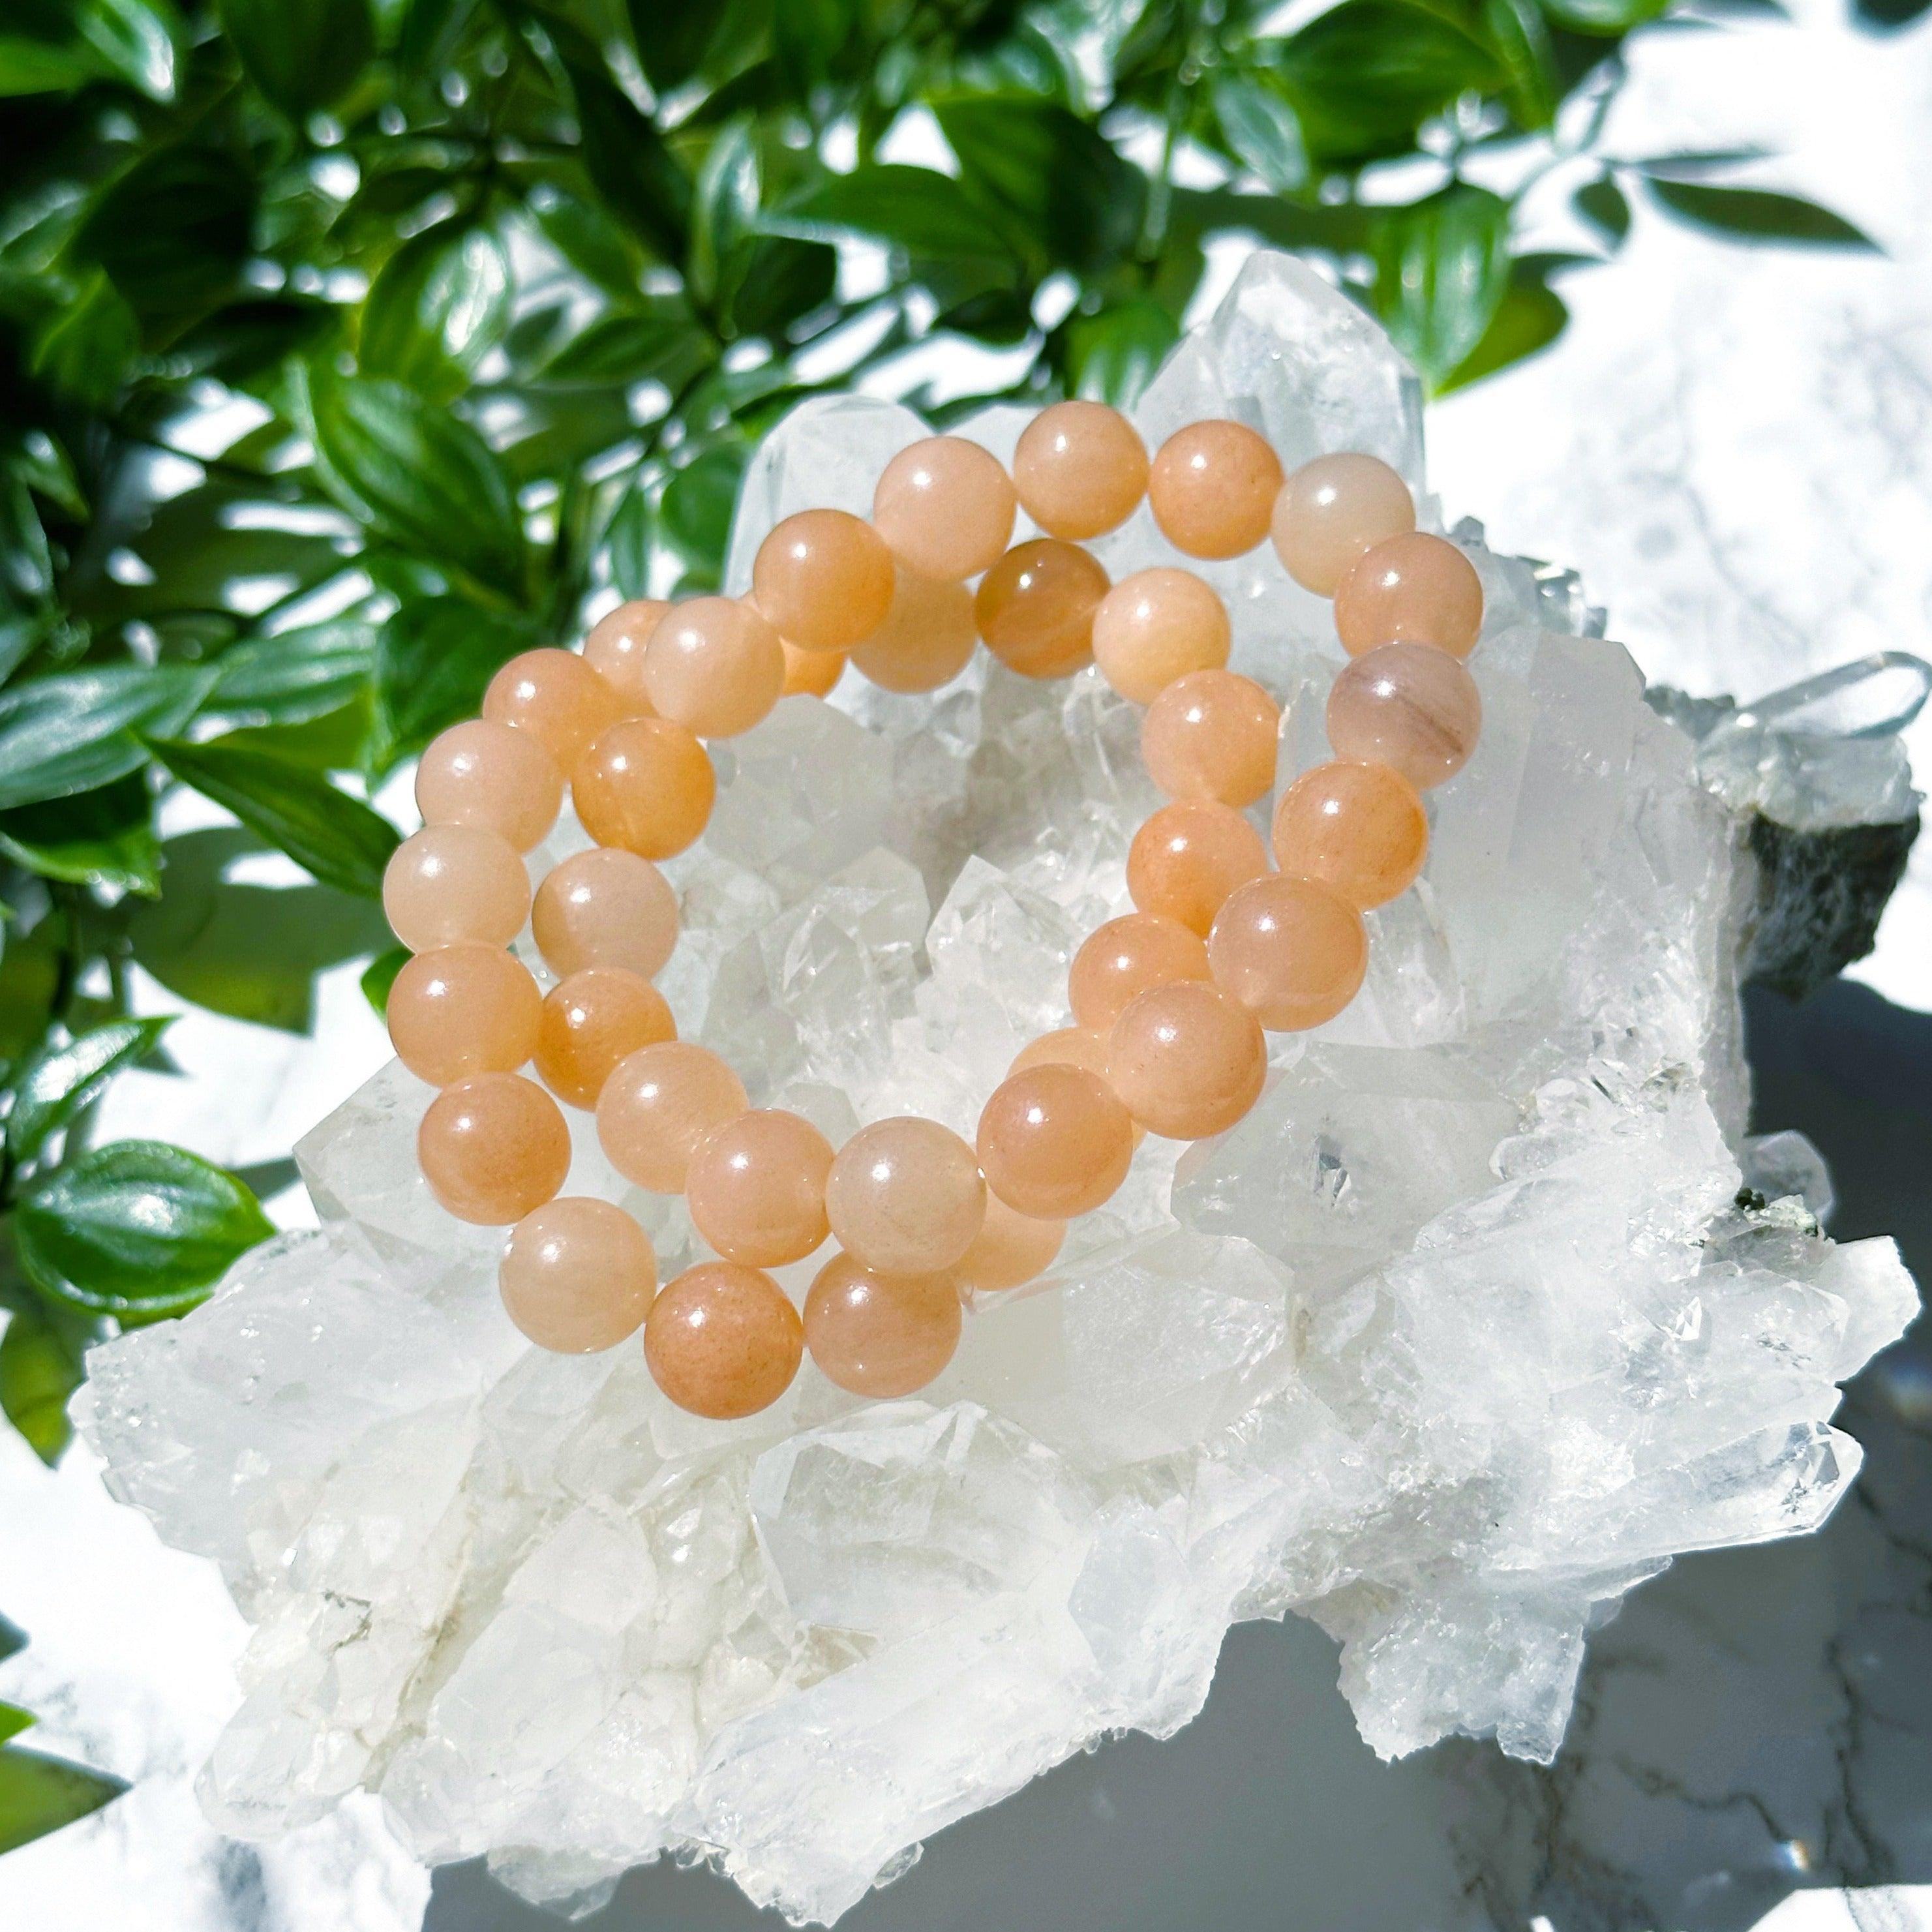 PEACH CHALCEDONY 10mm - HANDMADE CRYSTAL BRACELET - 10mm, april astro, bracelet, crystal bracelet, handmade bracelet, jewelry, market bracelet, Orange, peach chalcedony, recently added, Wearable - The Mineral Maven